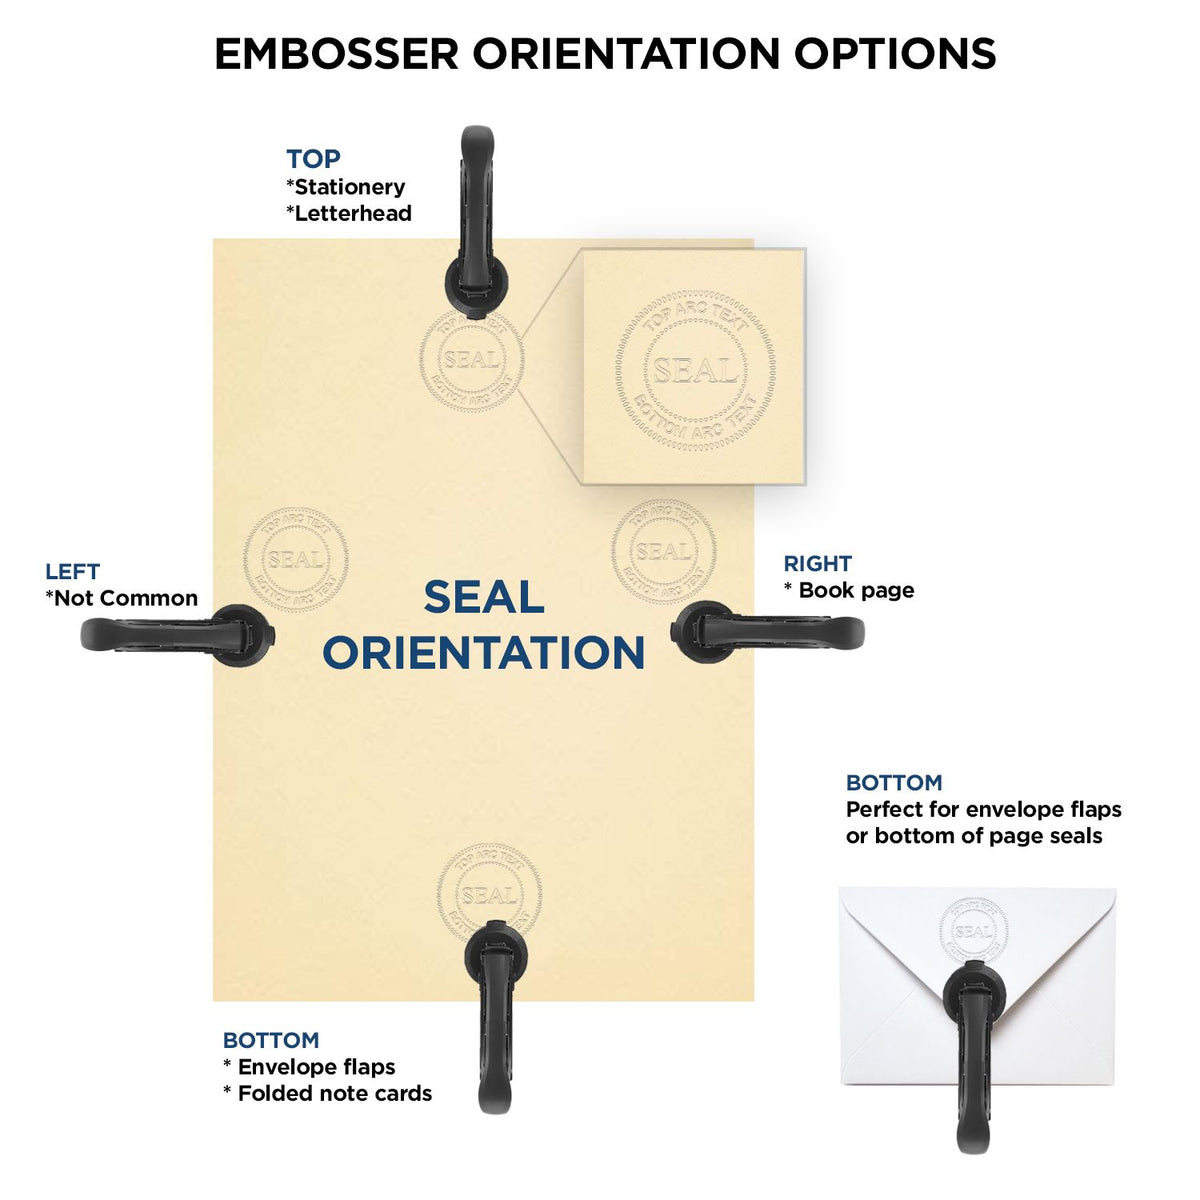 An infographic for the Long Reach Maryland Land Surveyor Seal showing embosser orientation, this is showing examples of a top, bottom, right and left insert.